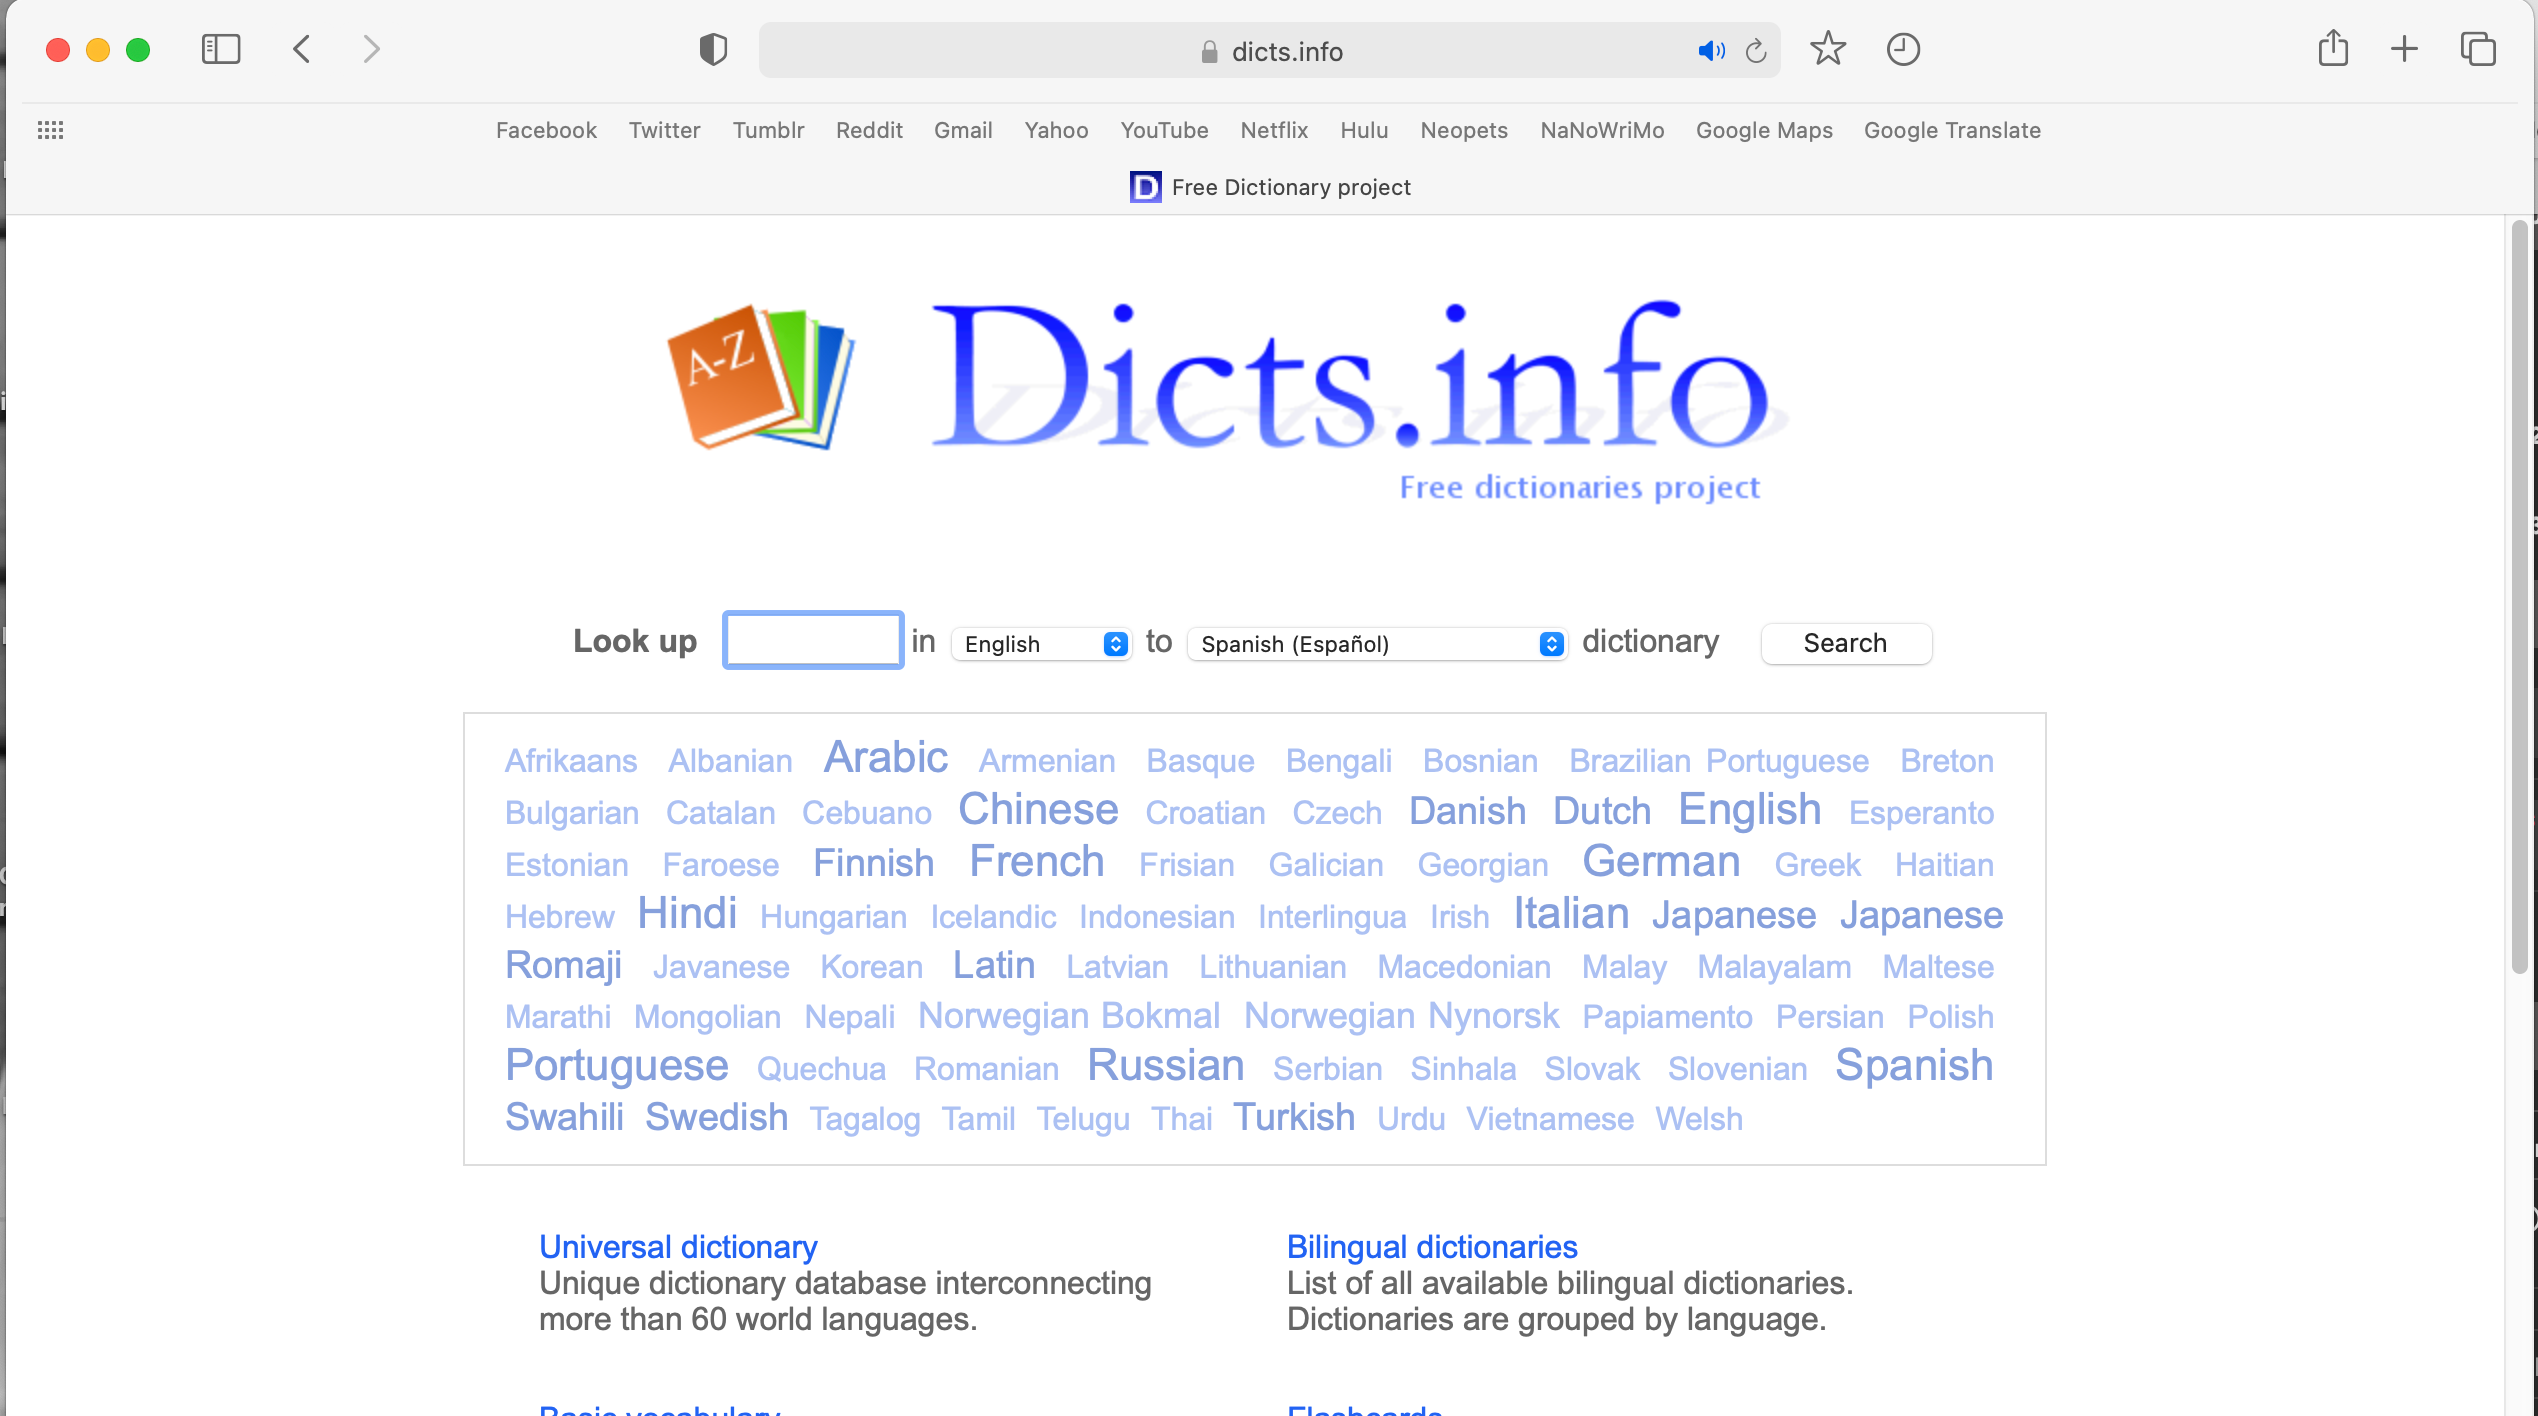 Dicts.info site open in Safari on a MacBook Pro